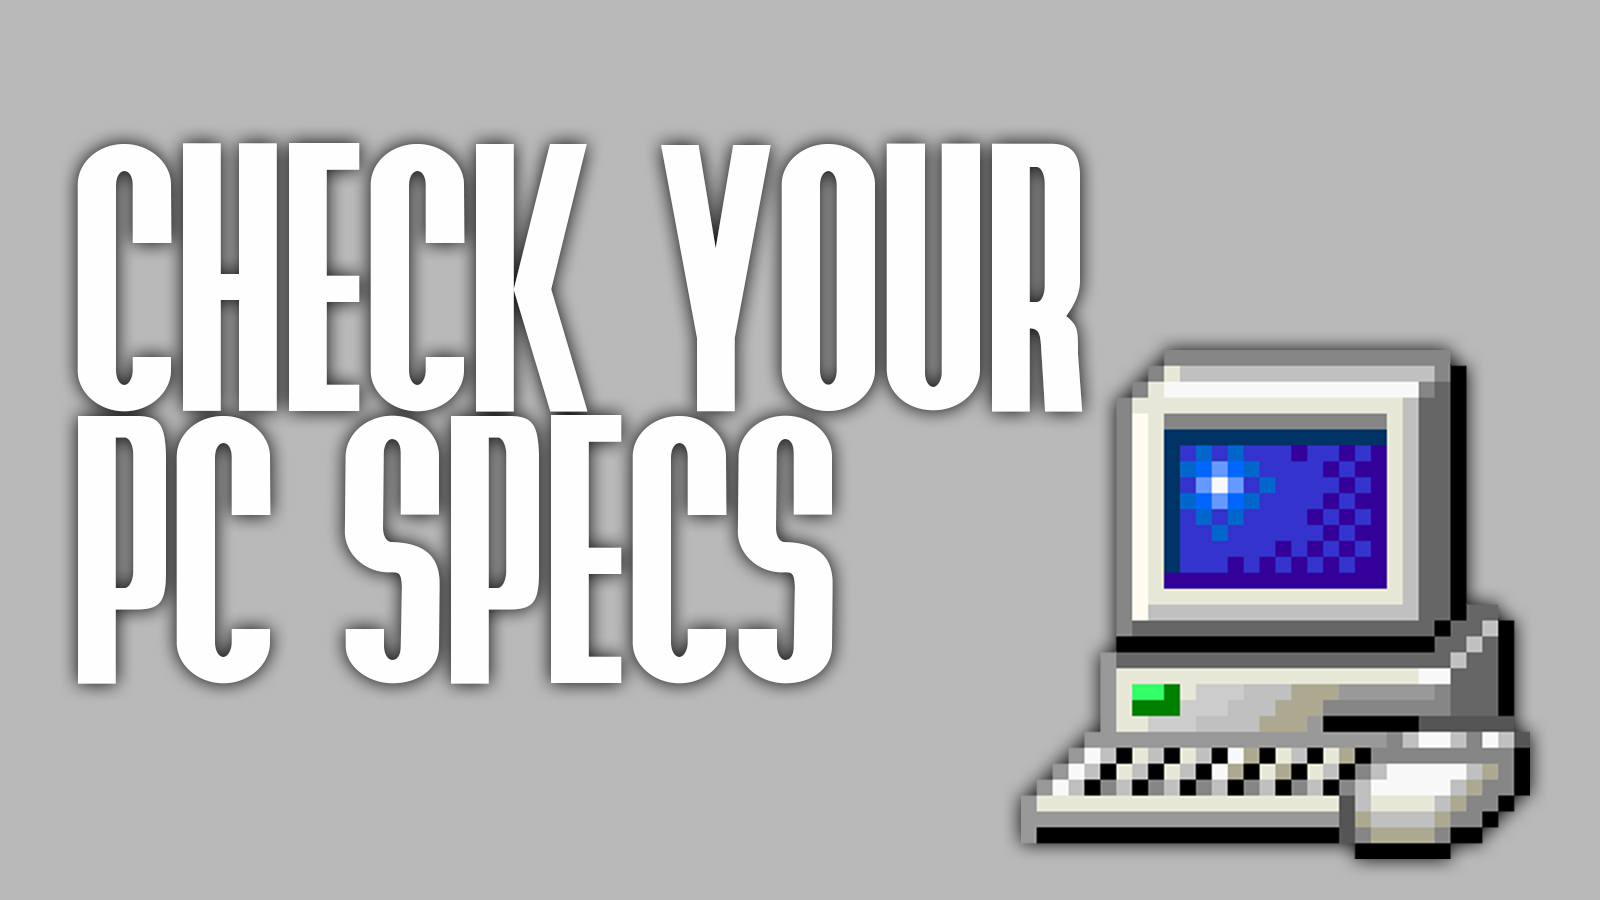 The right way to test your PC specs: Speccy, Home windows & extra – Egaxo